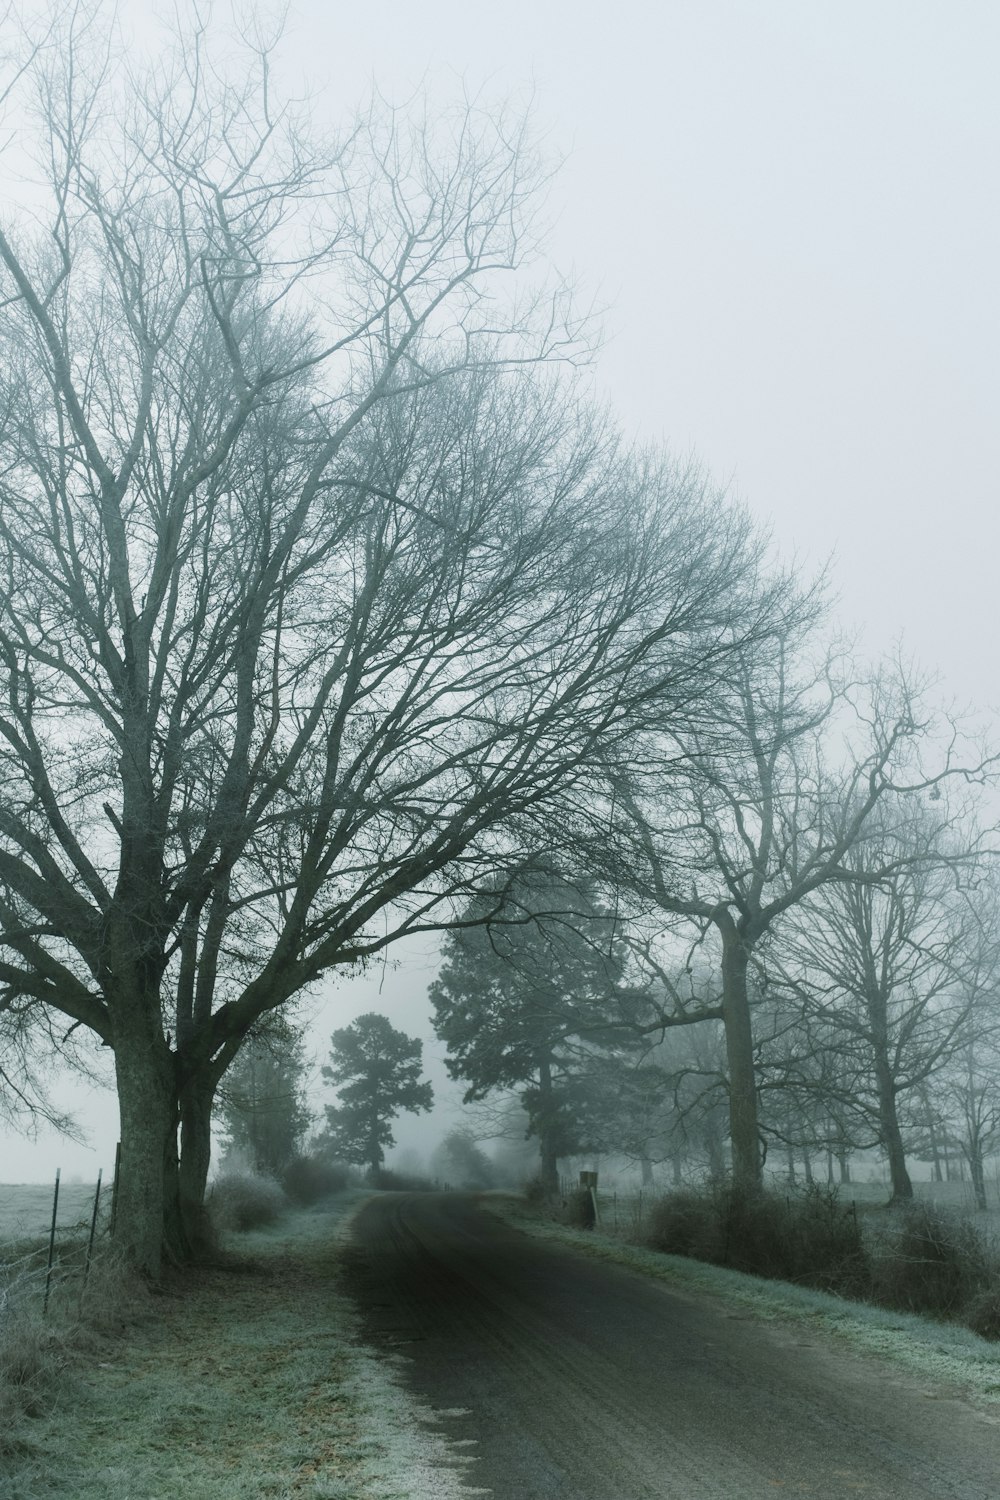 a foggy road with trees and a person walking down the road